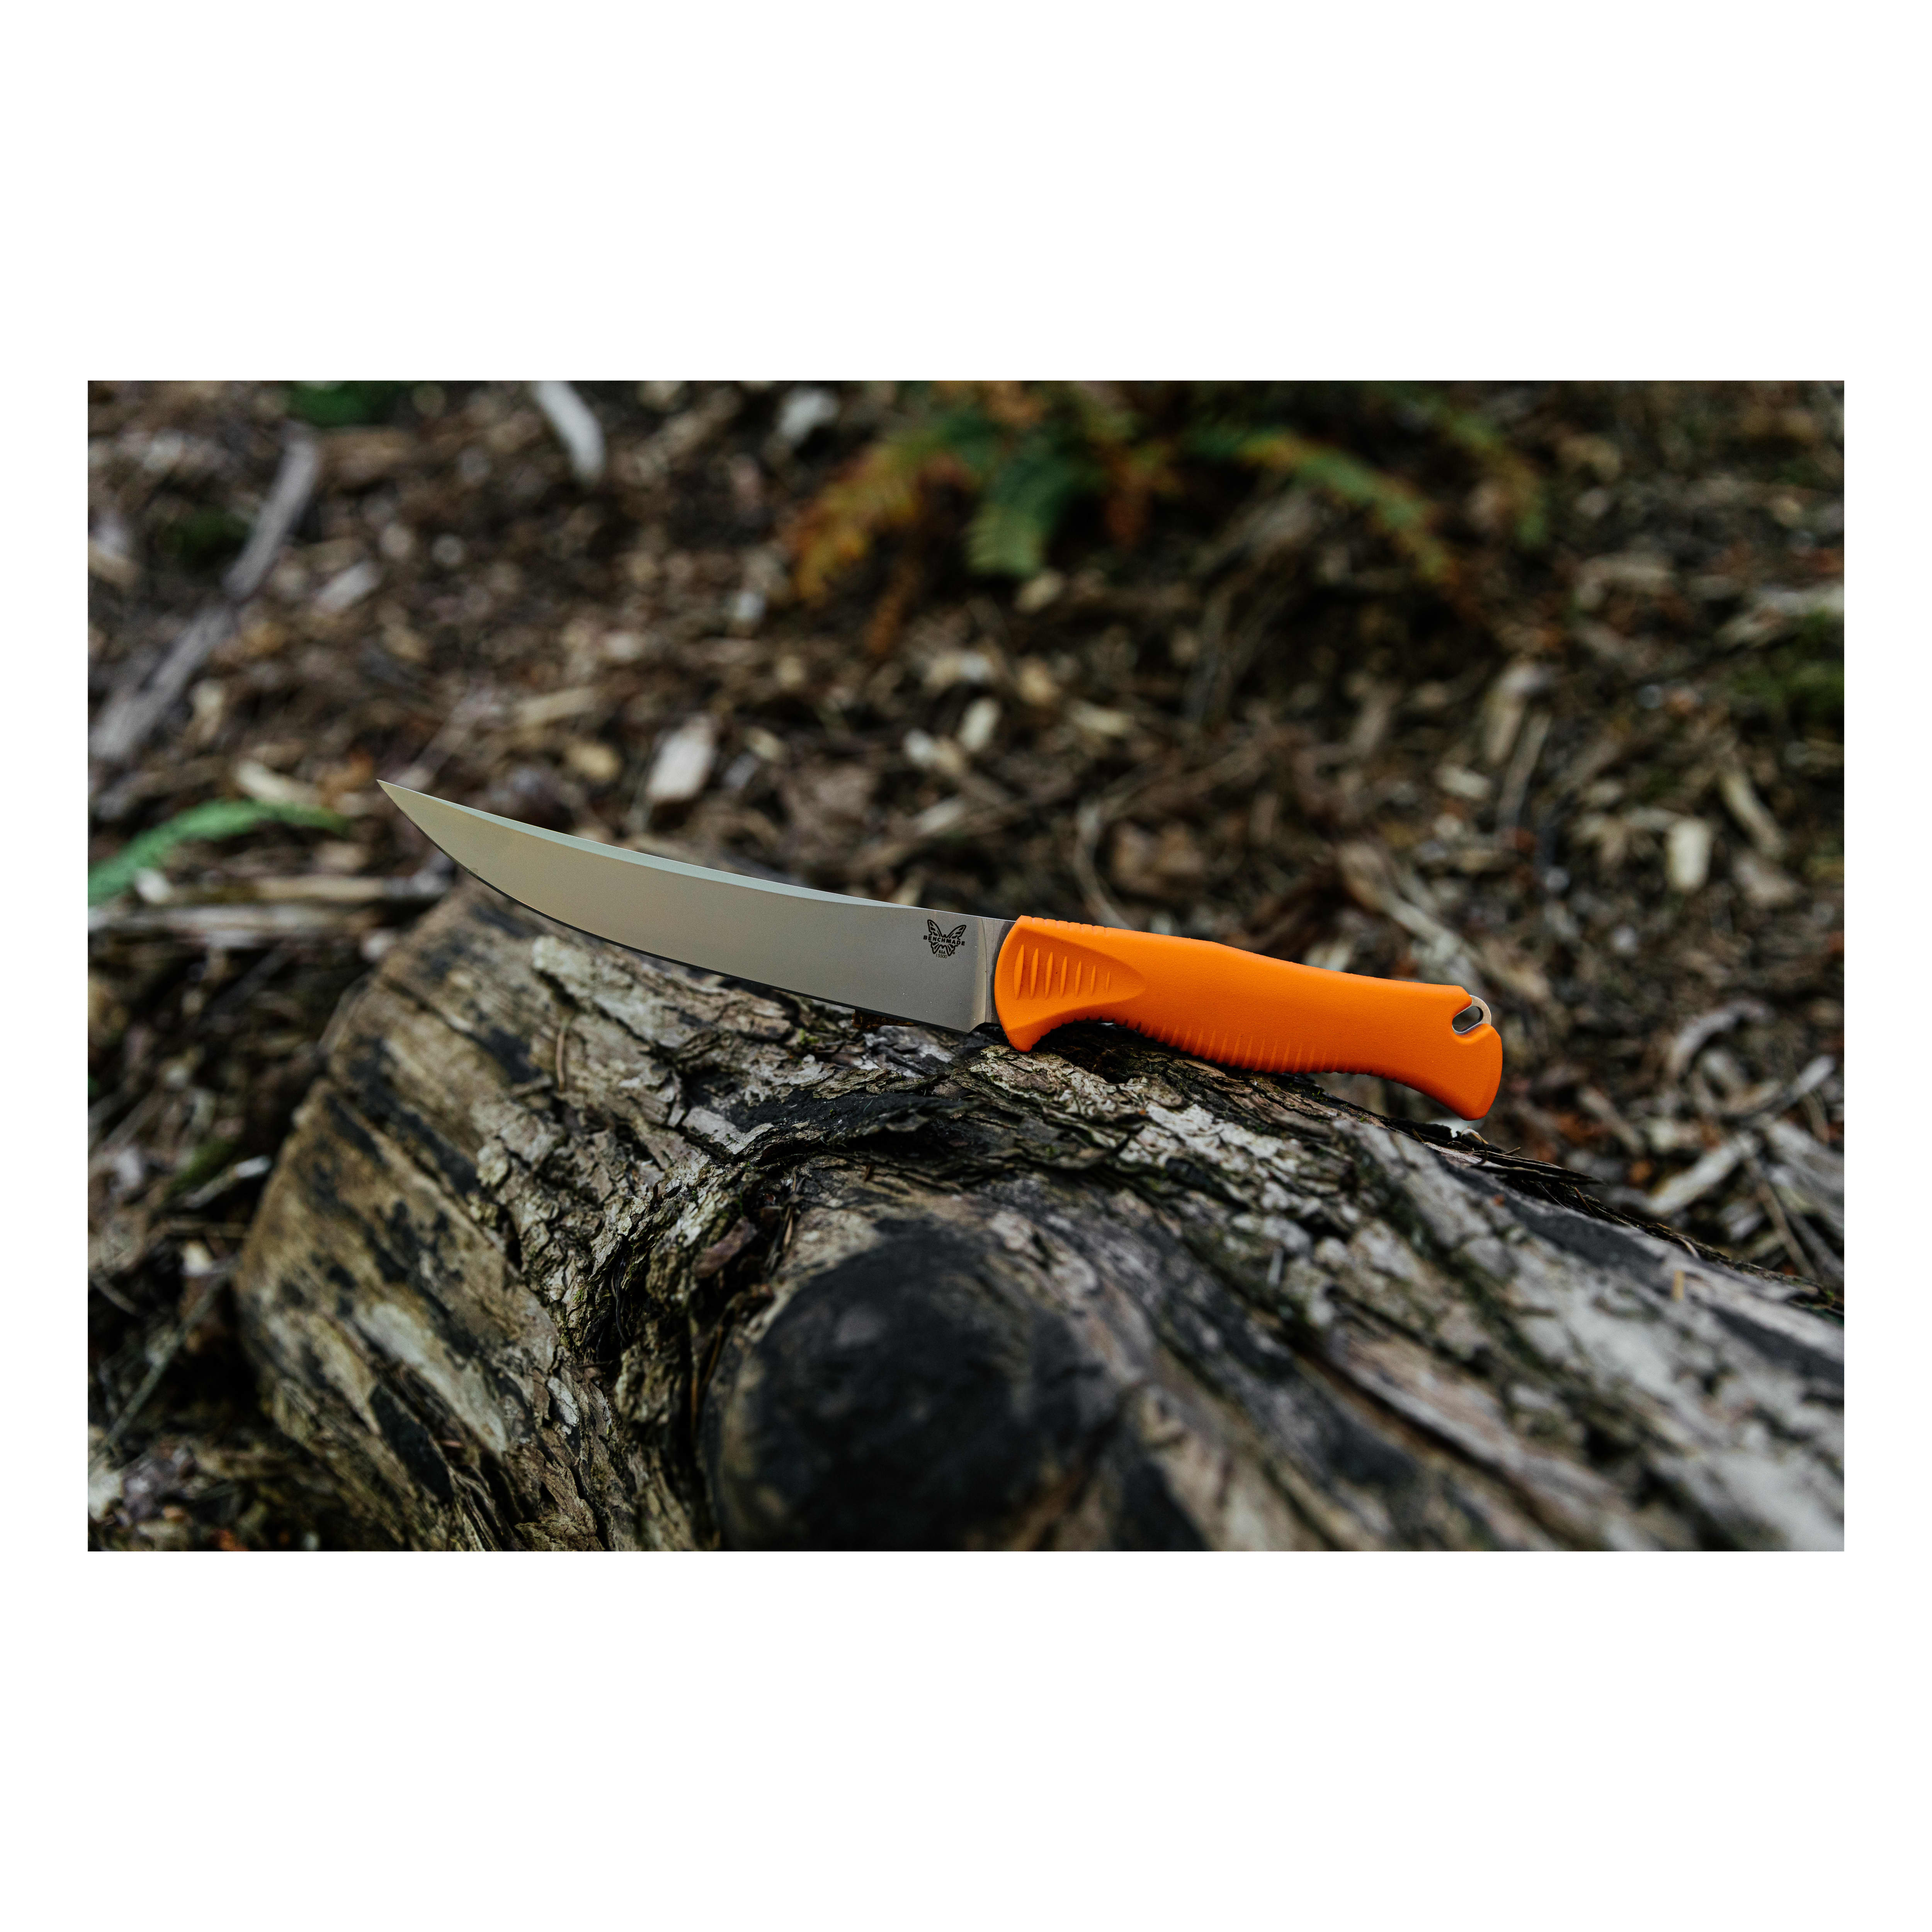 Benchmade® 15500 Meatcrafter Fixed Blade Knife